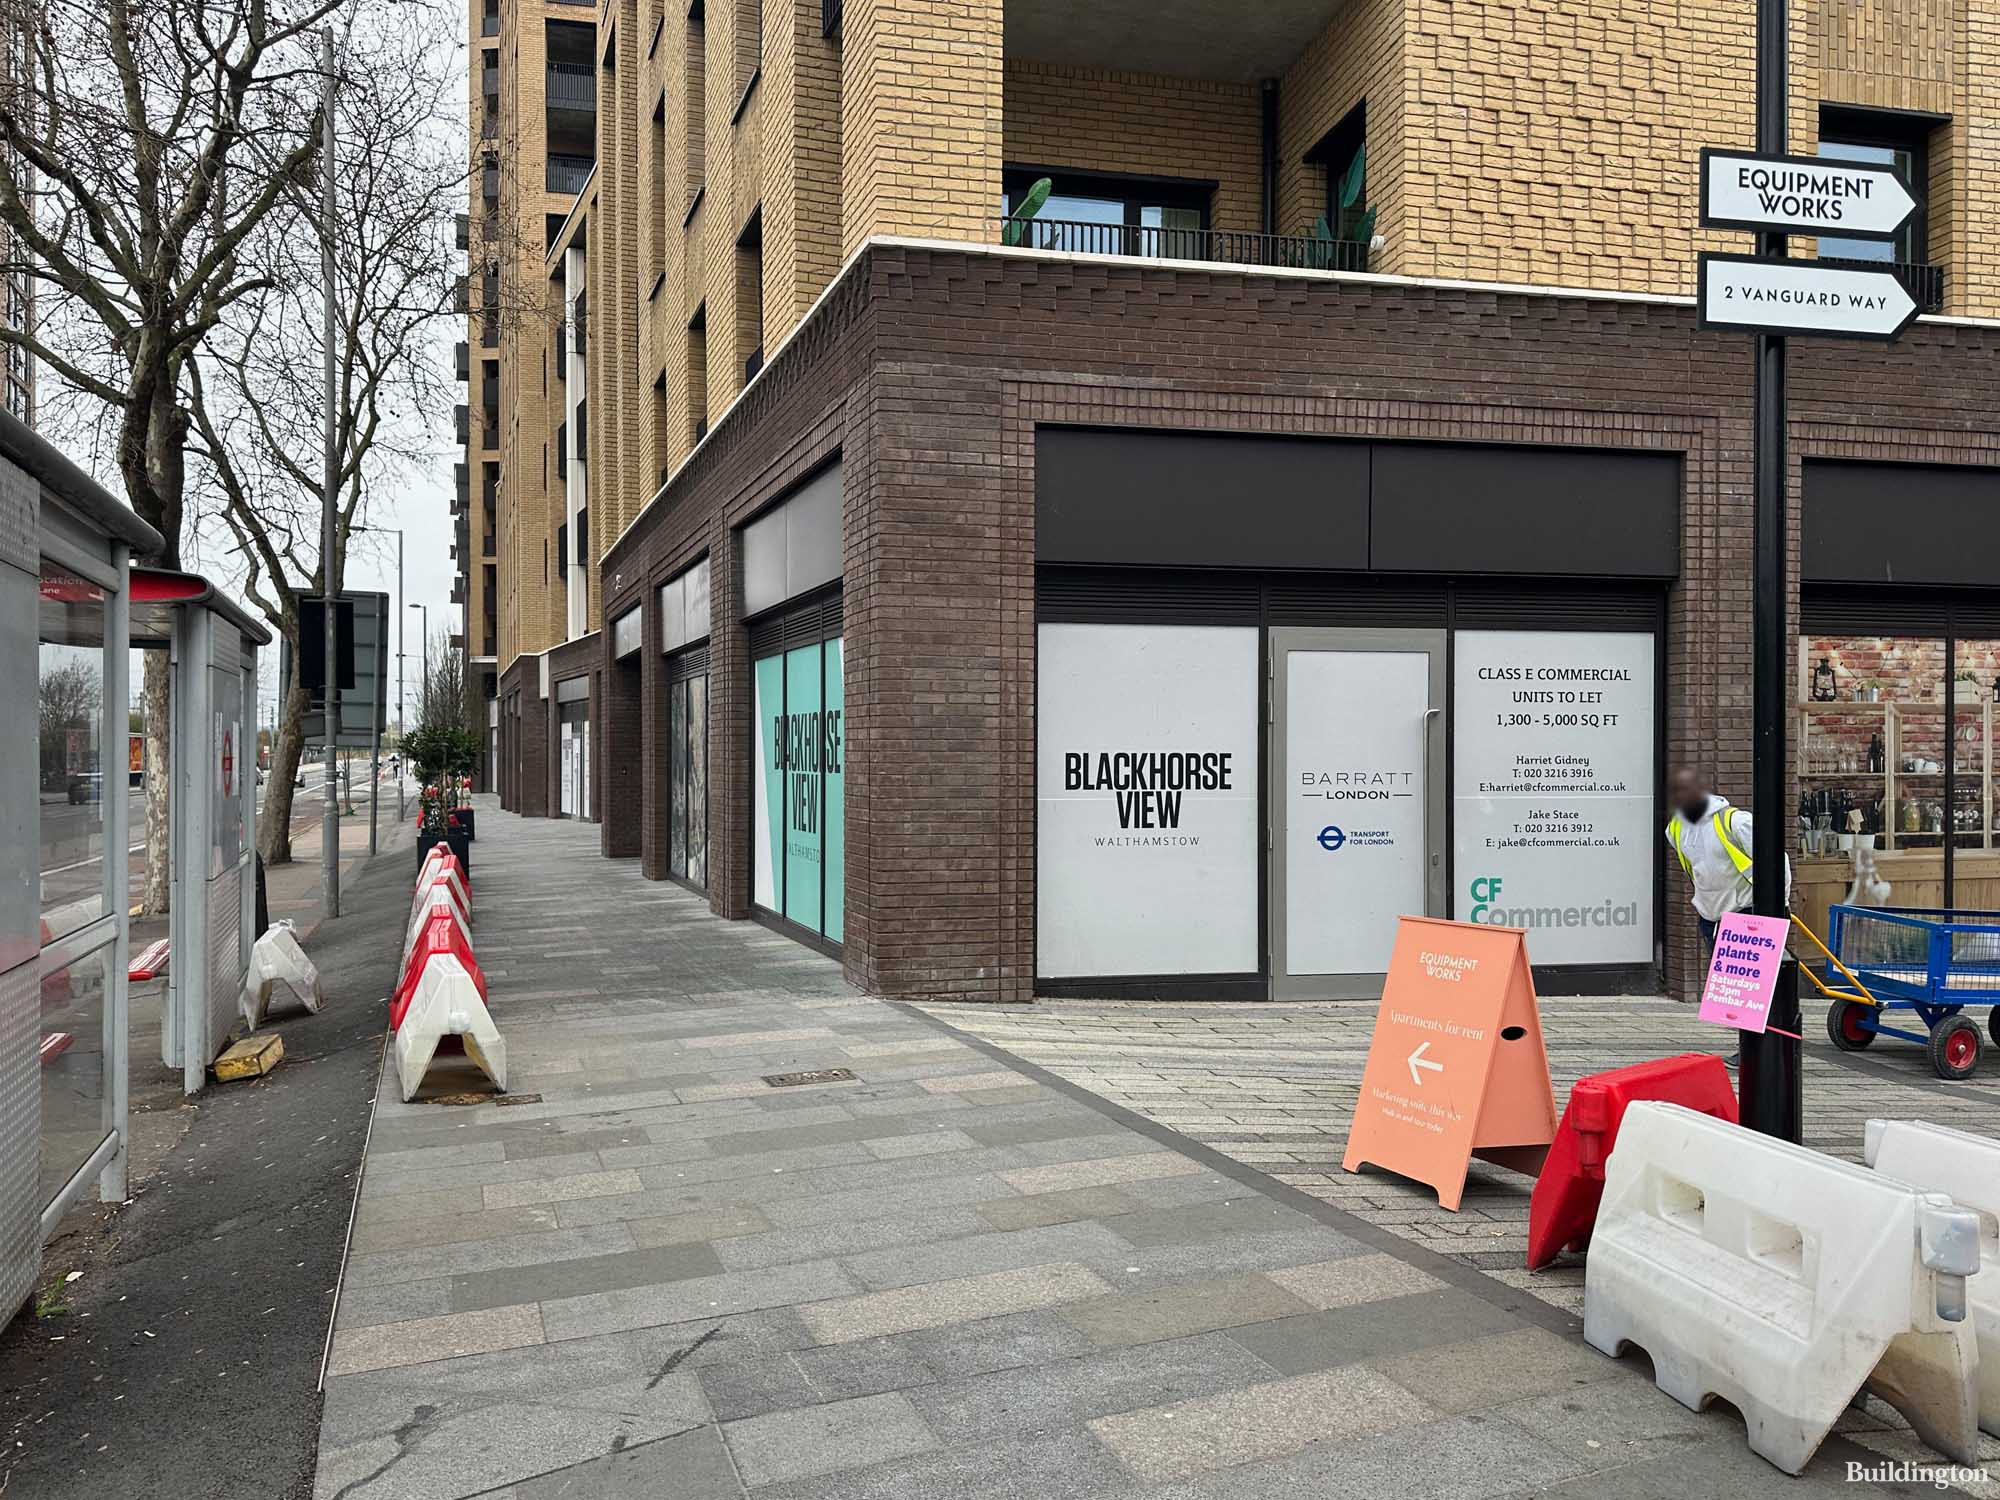 Blackhorse View development by Barratt London with commercial space on the ground floor in Walthamstow, London E17.